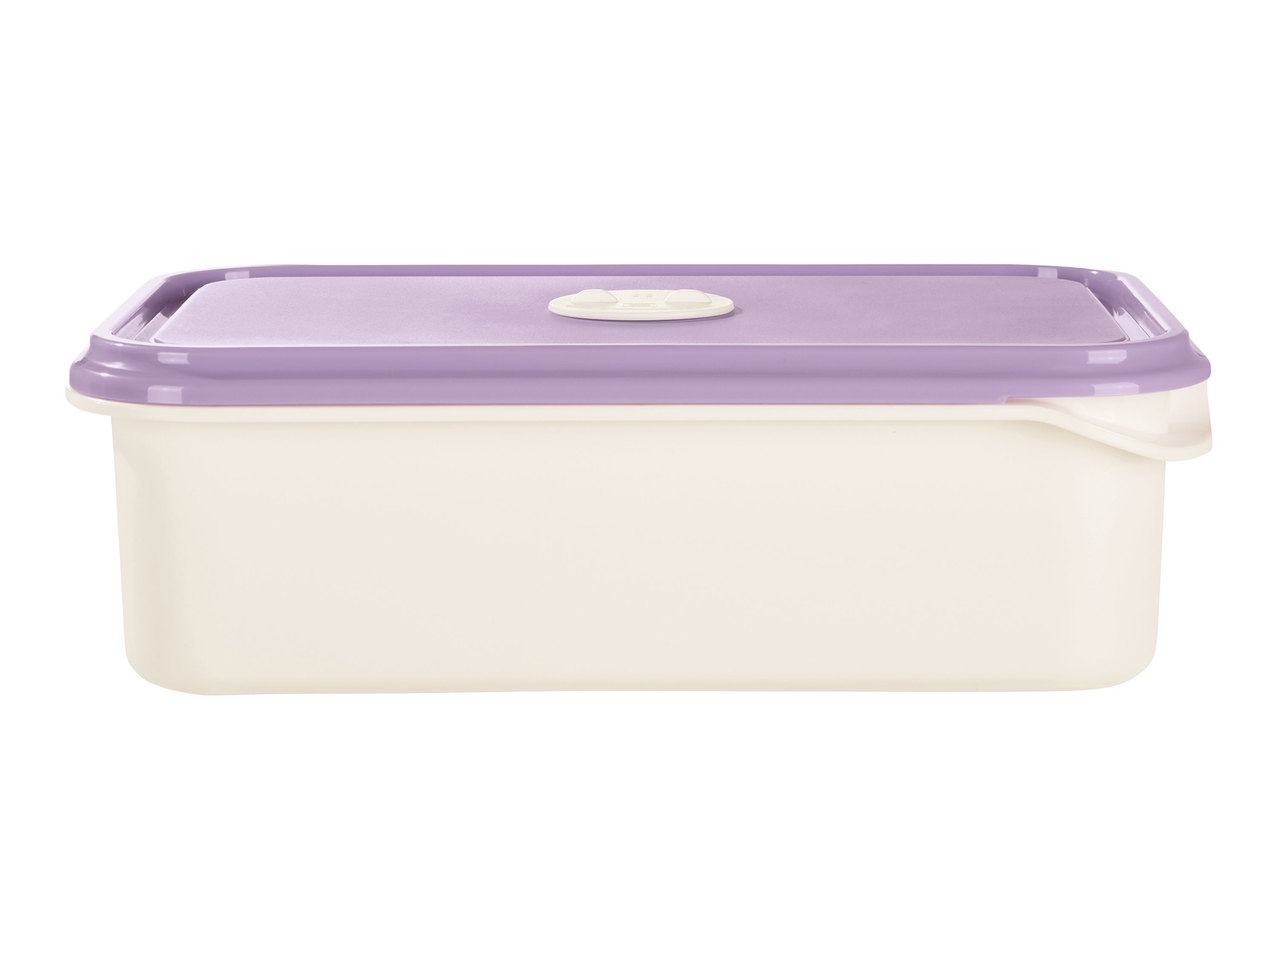 Ernesto Microwavable Container1